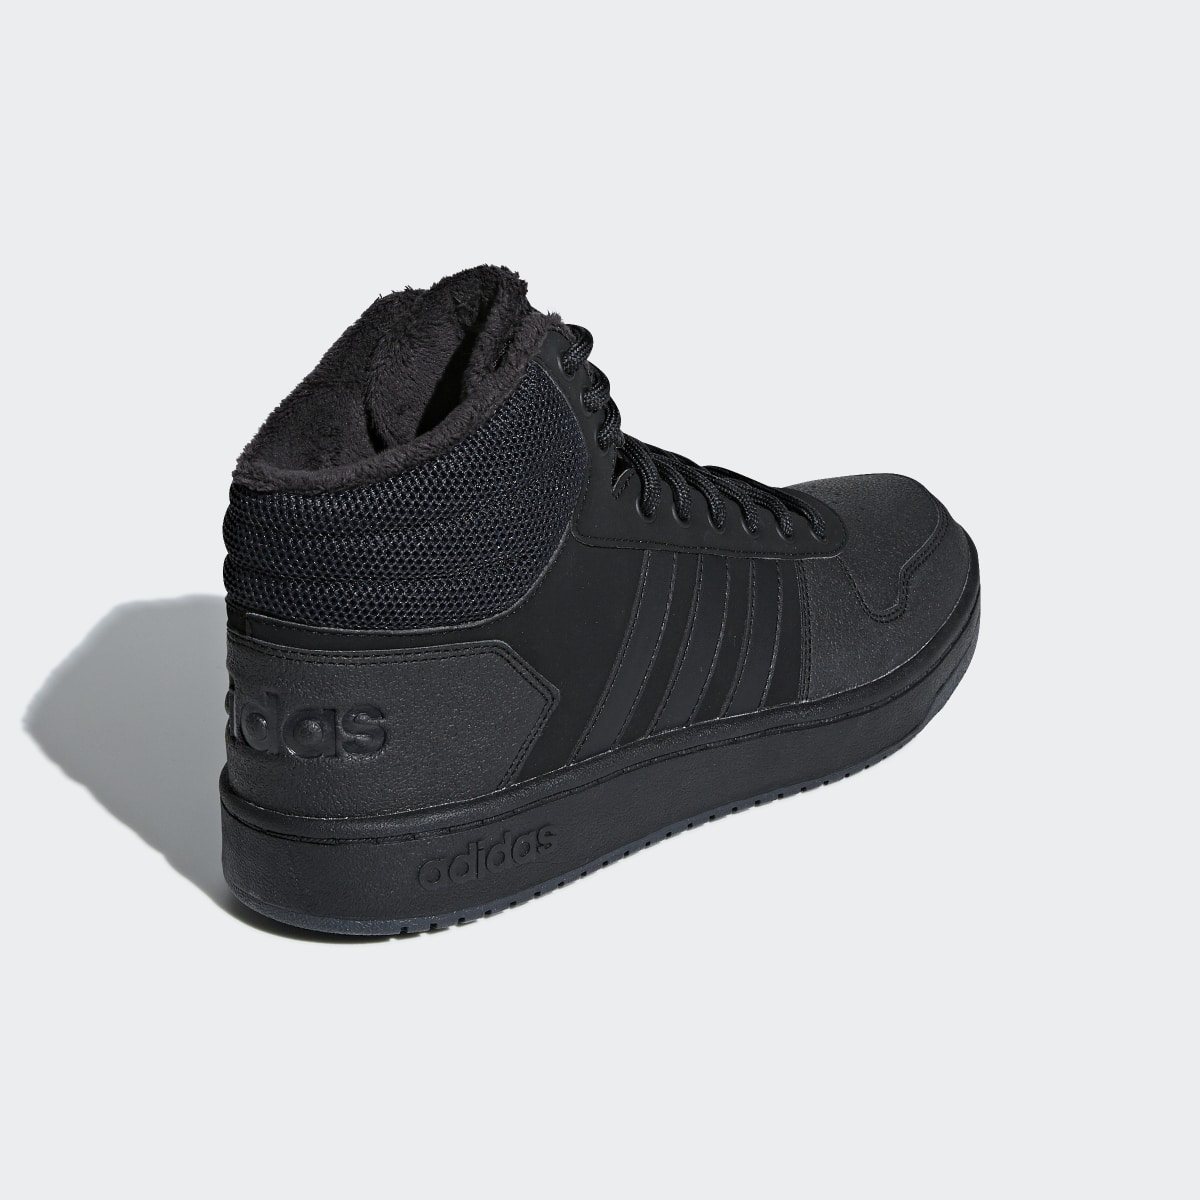 Adidas Hoops 2.0 Mid Shoes. 7